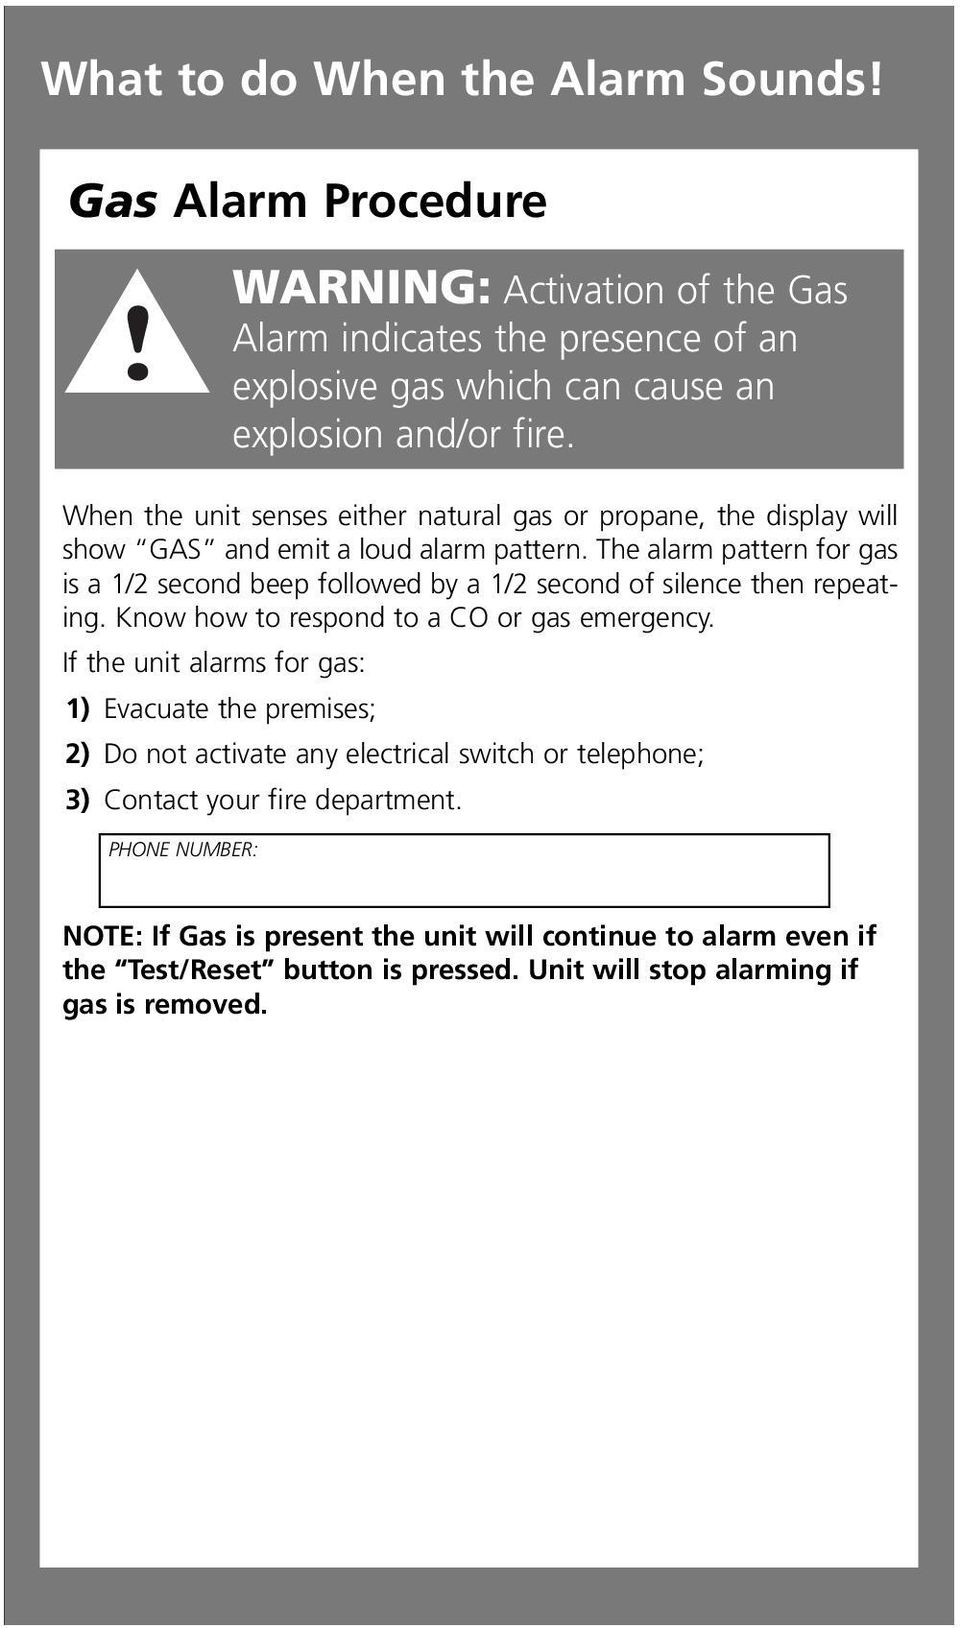 The alarm pattern for gas is a 1/2 second beep followed by a 1/2 second of silence then repeating. Know how to respond to a CO or gas emergency.